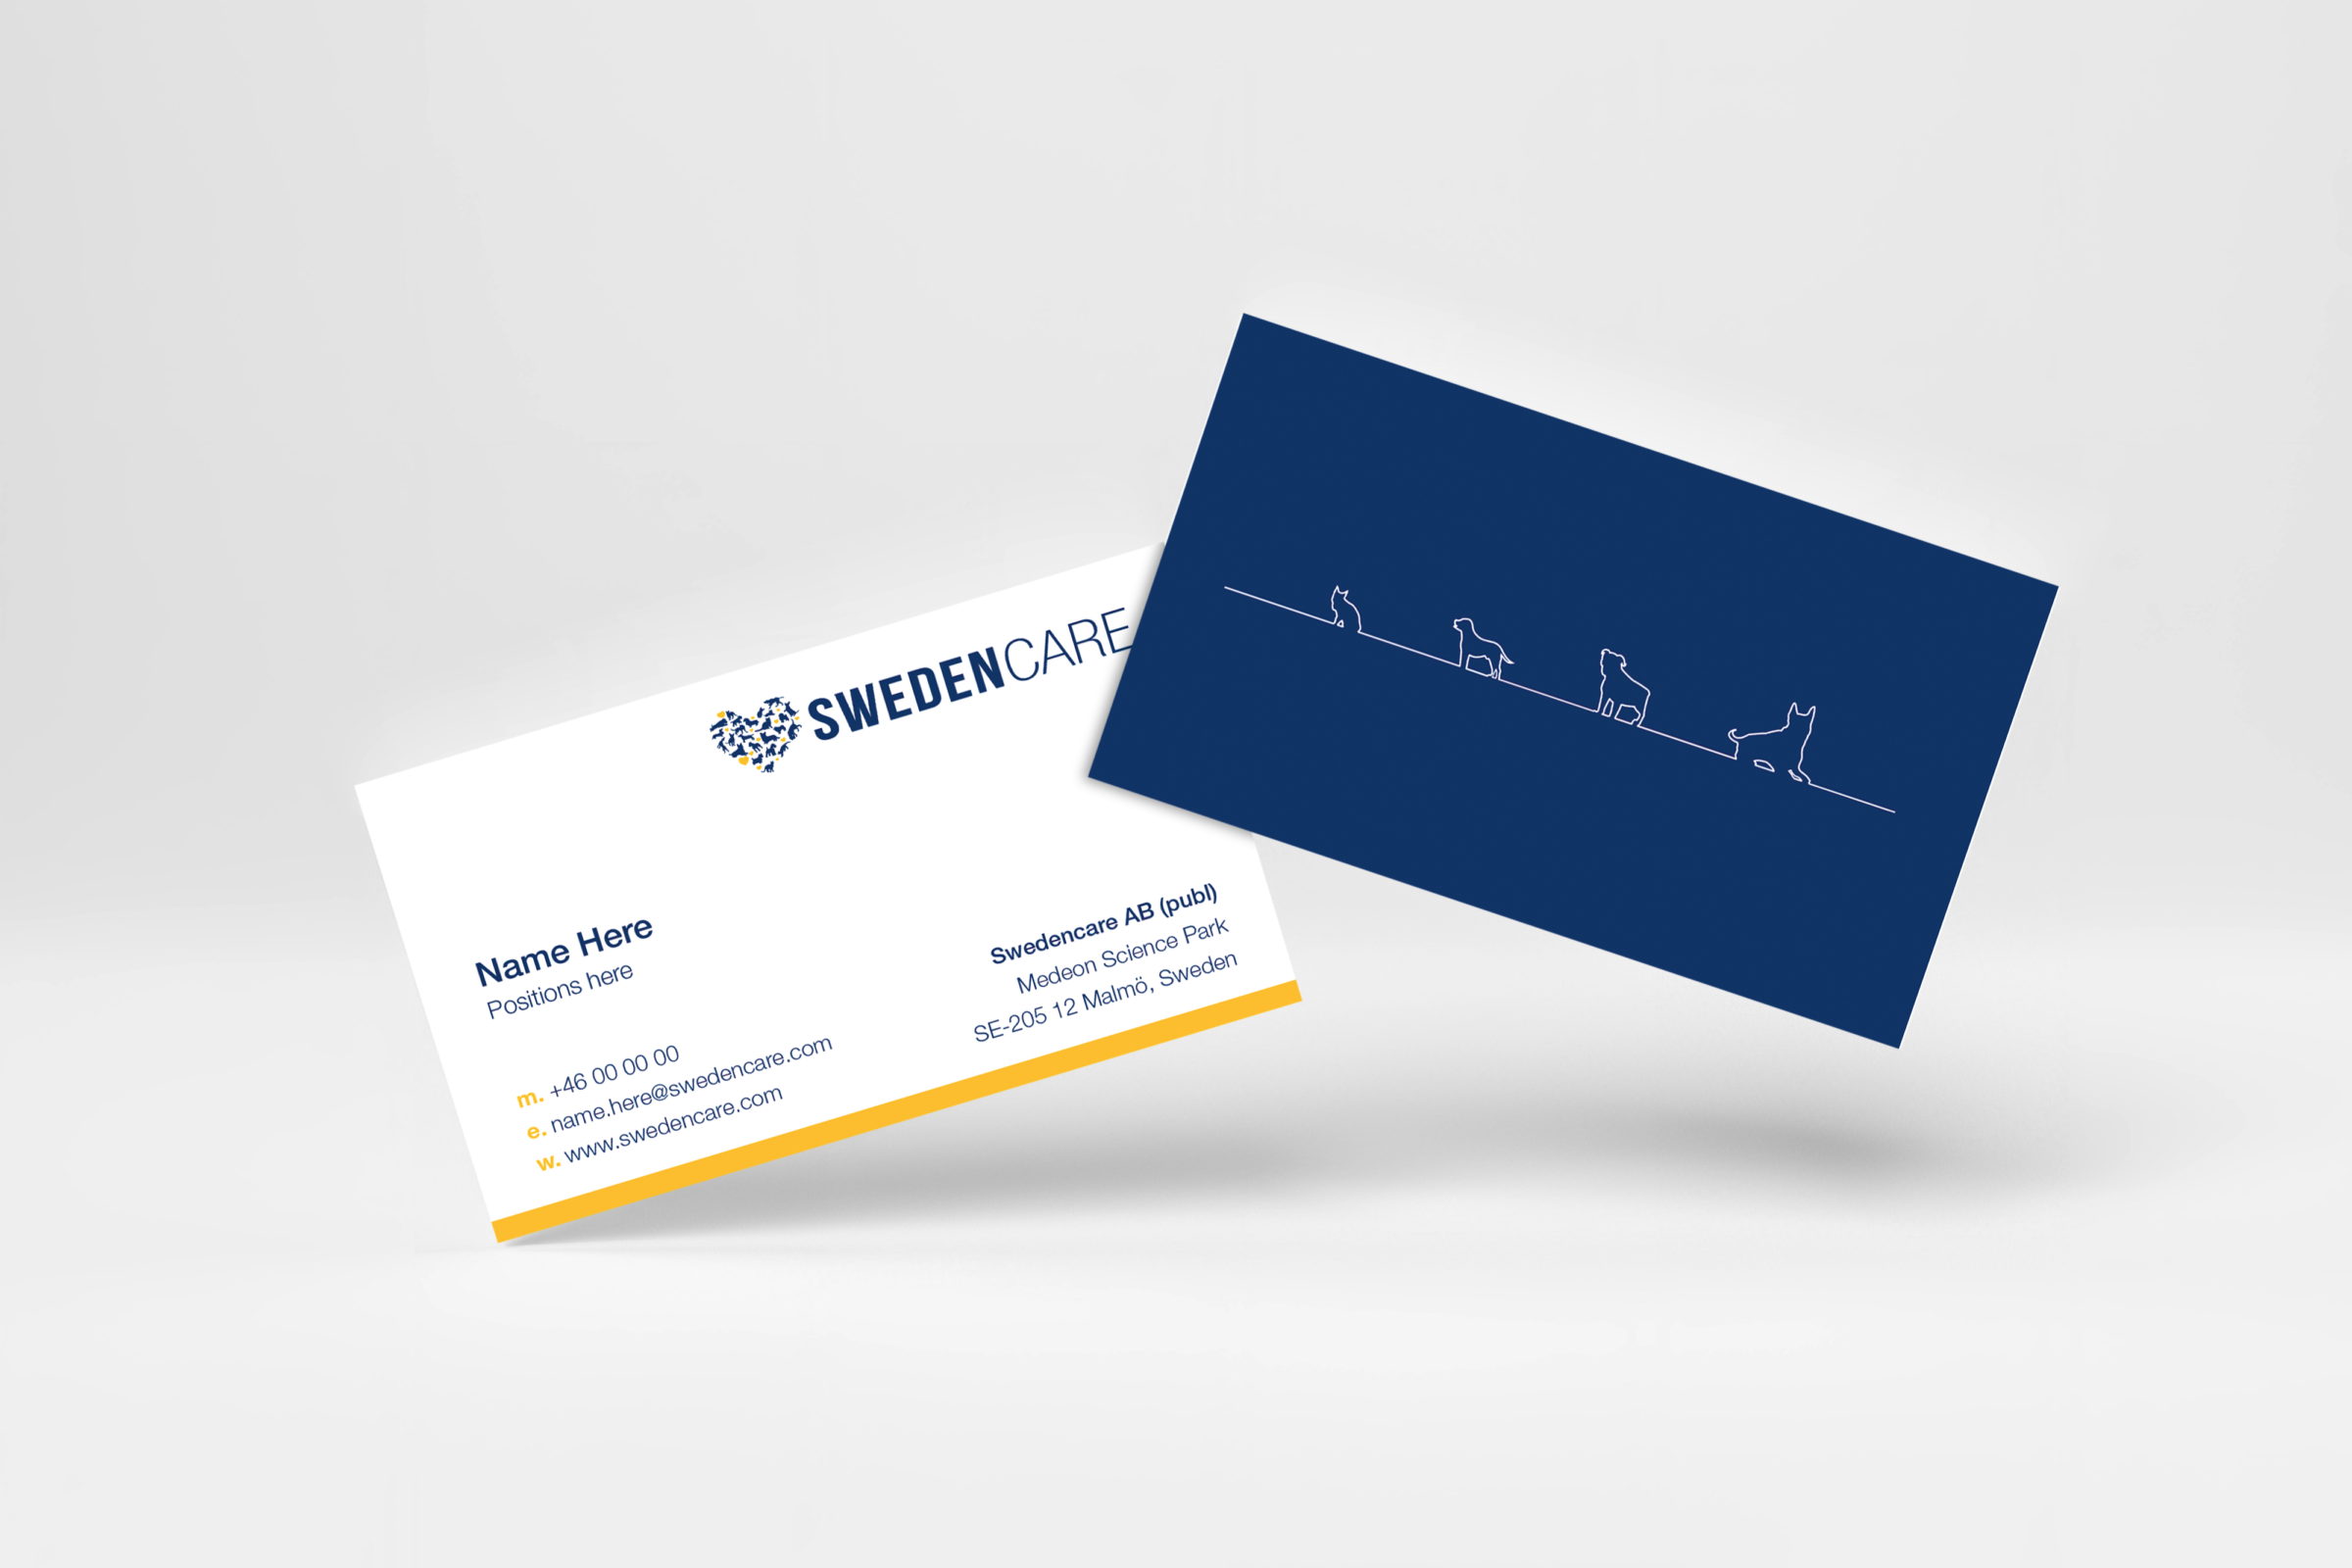 Swedencare visual identity business card made by Adentity